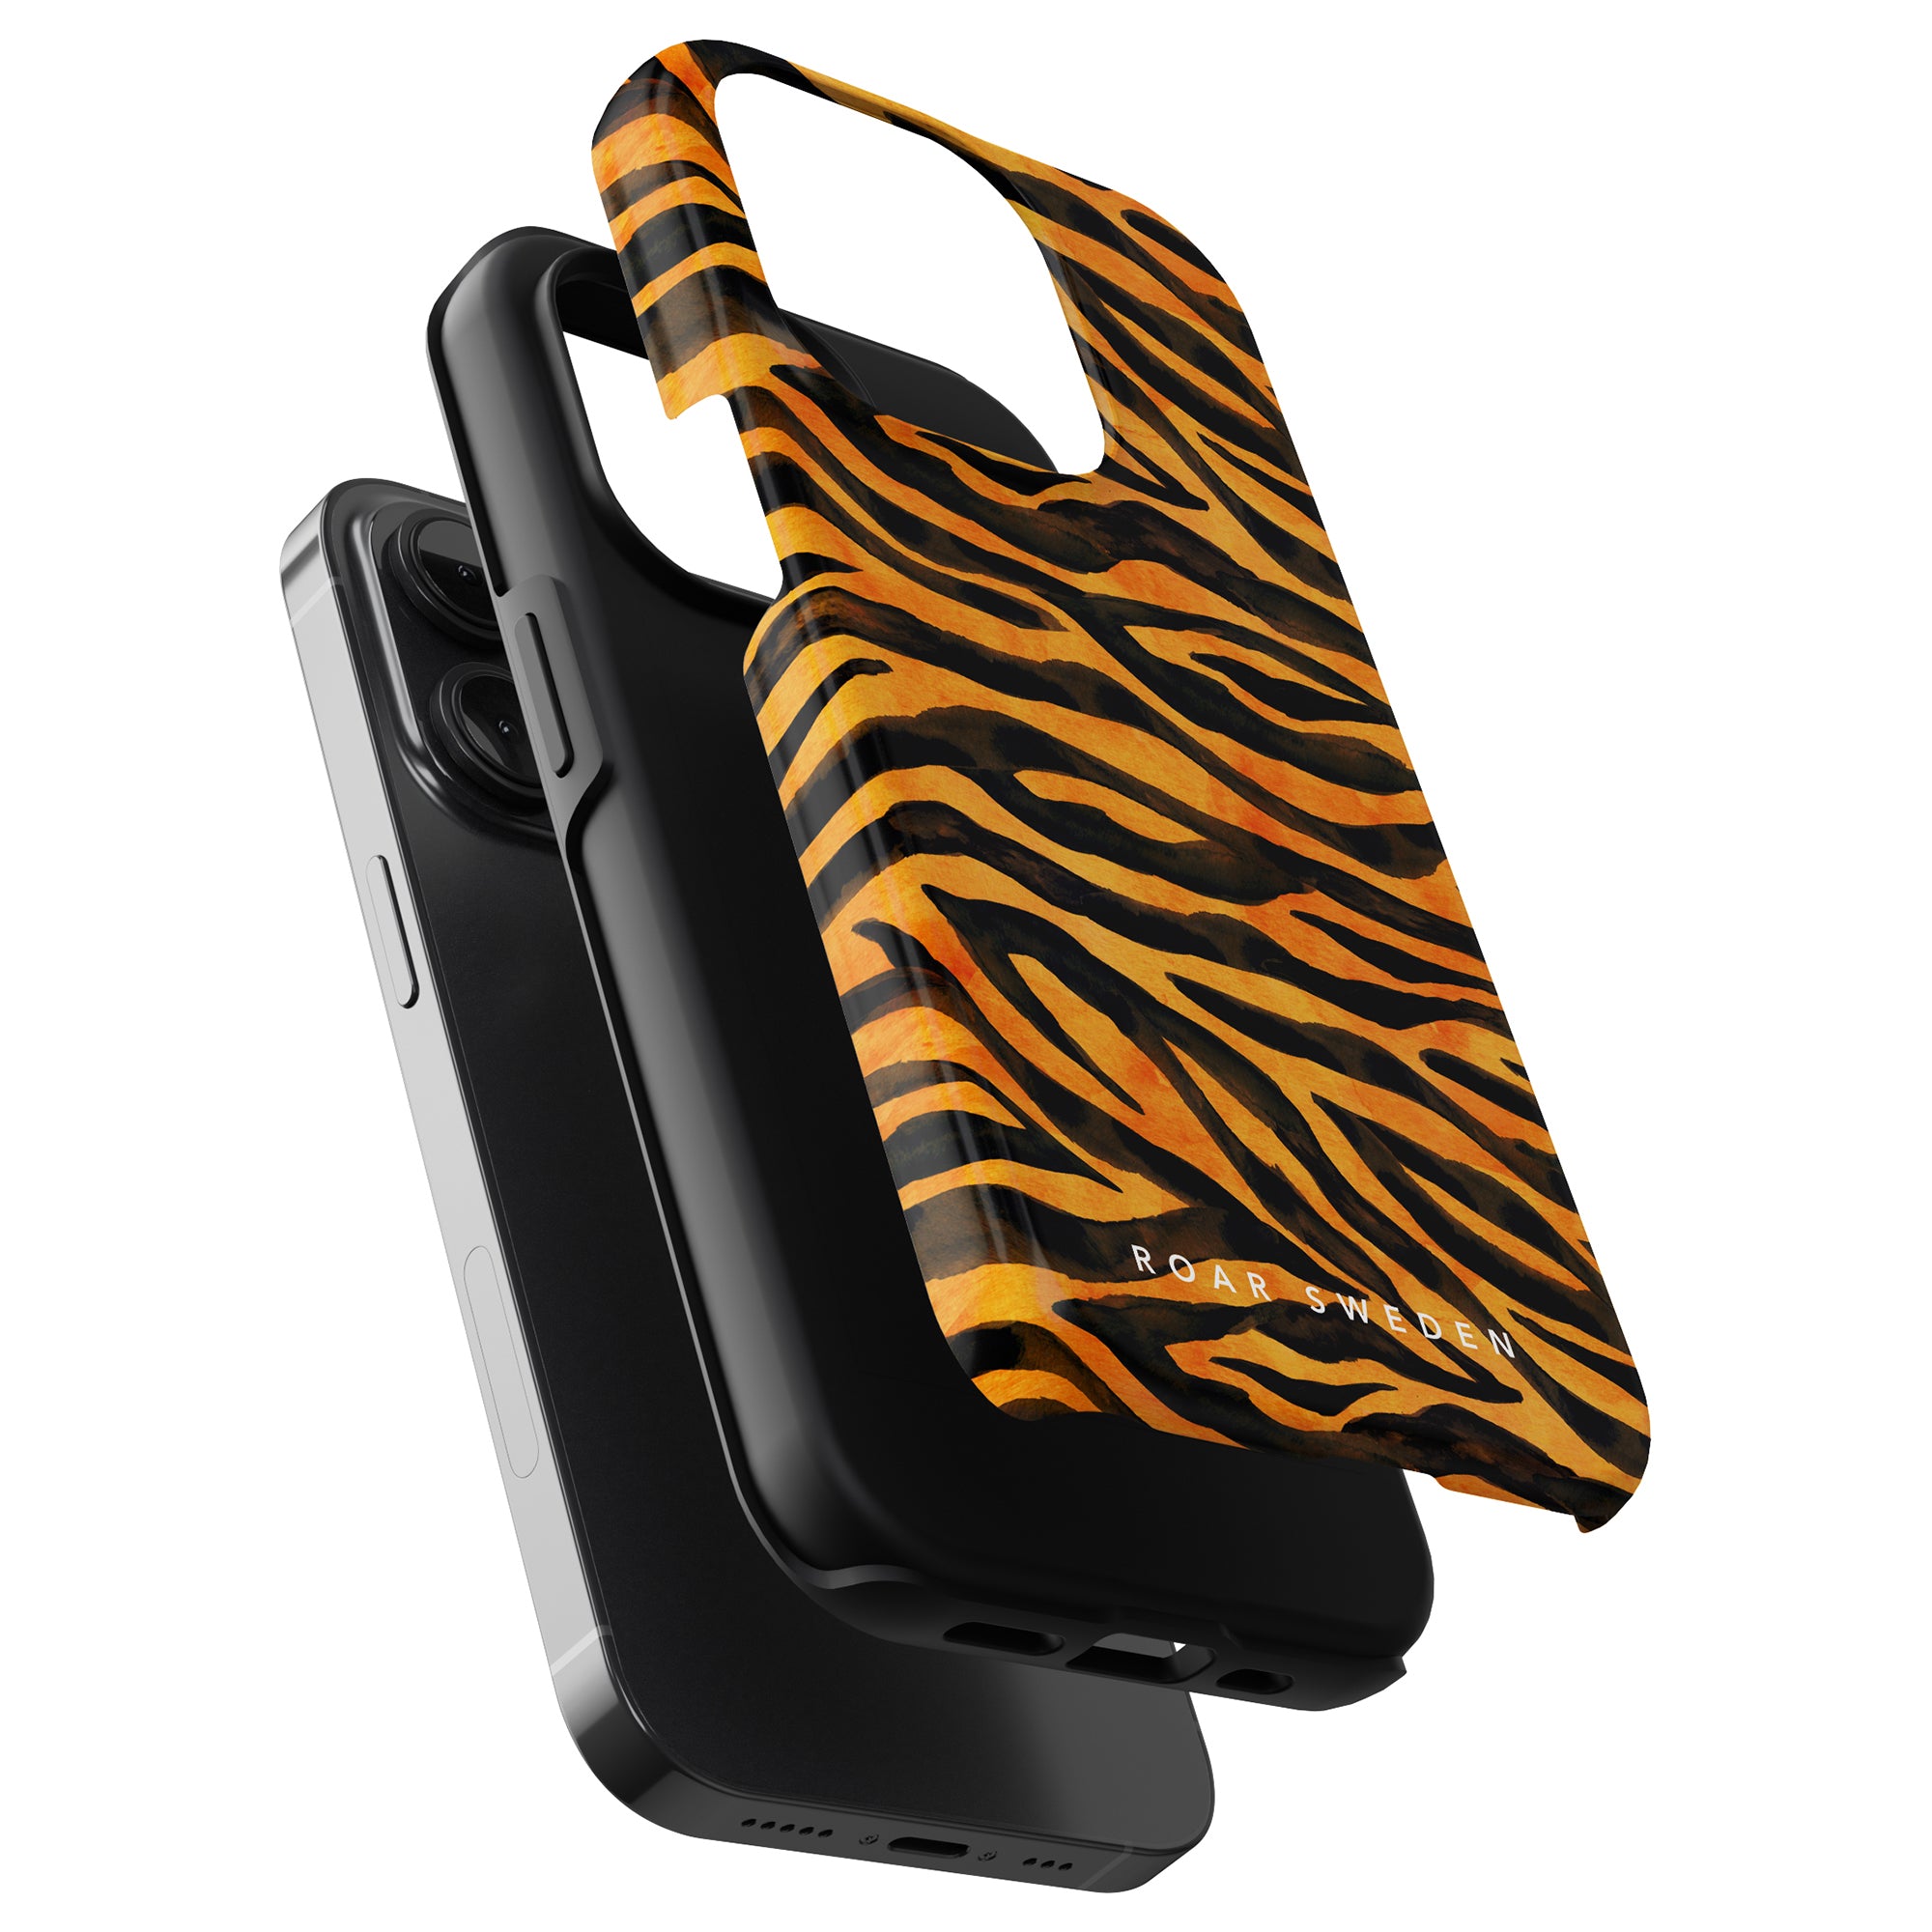 Two Roar - Tough Cases with smartphones, with one case featuring a tiger stripe design.